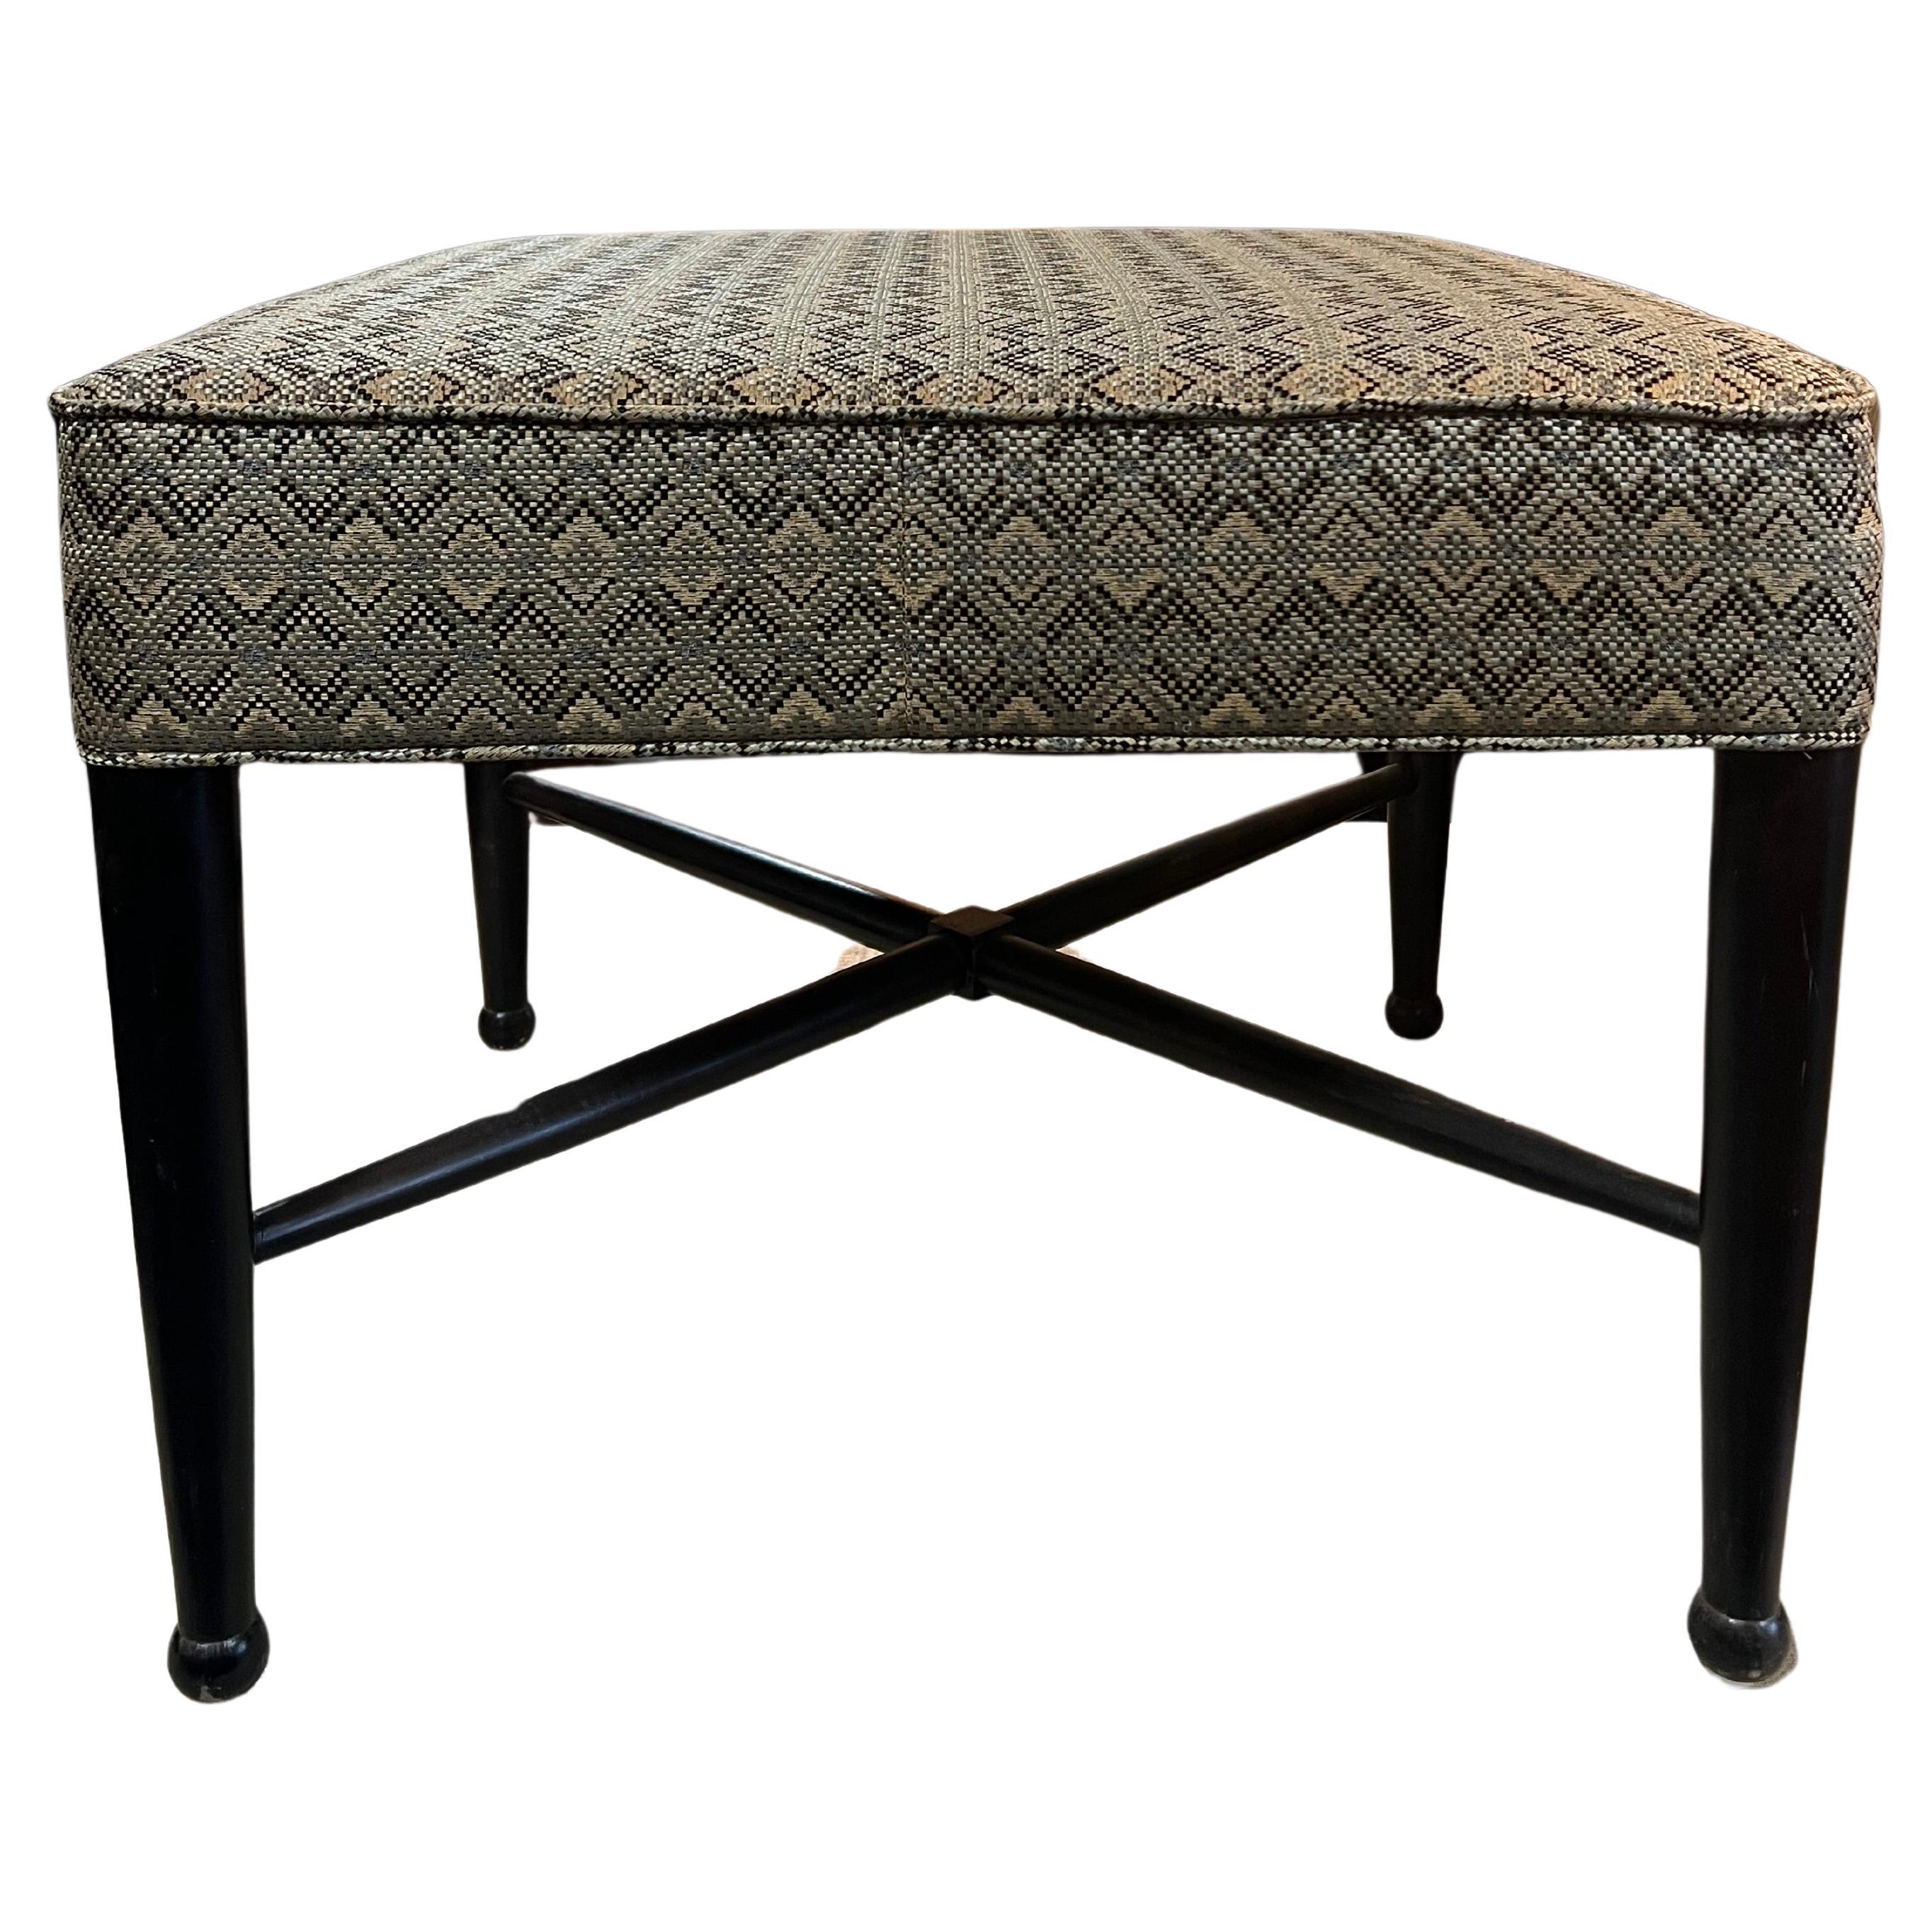 Midcentury Square Ottoman in style of Edward Wormley  For Sale